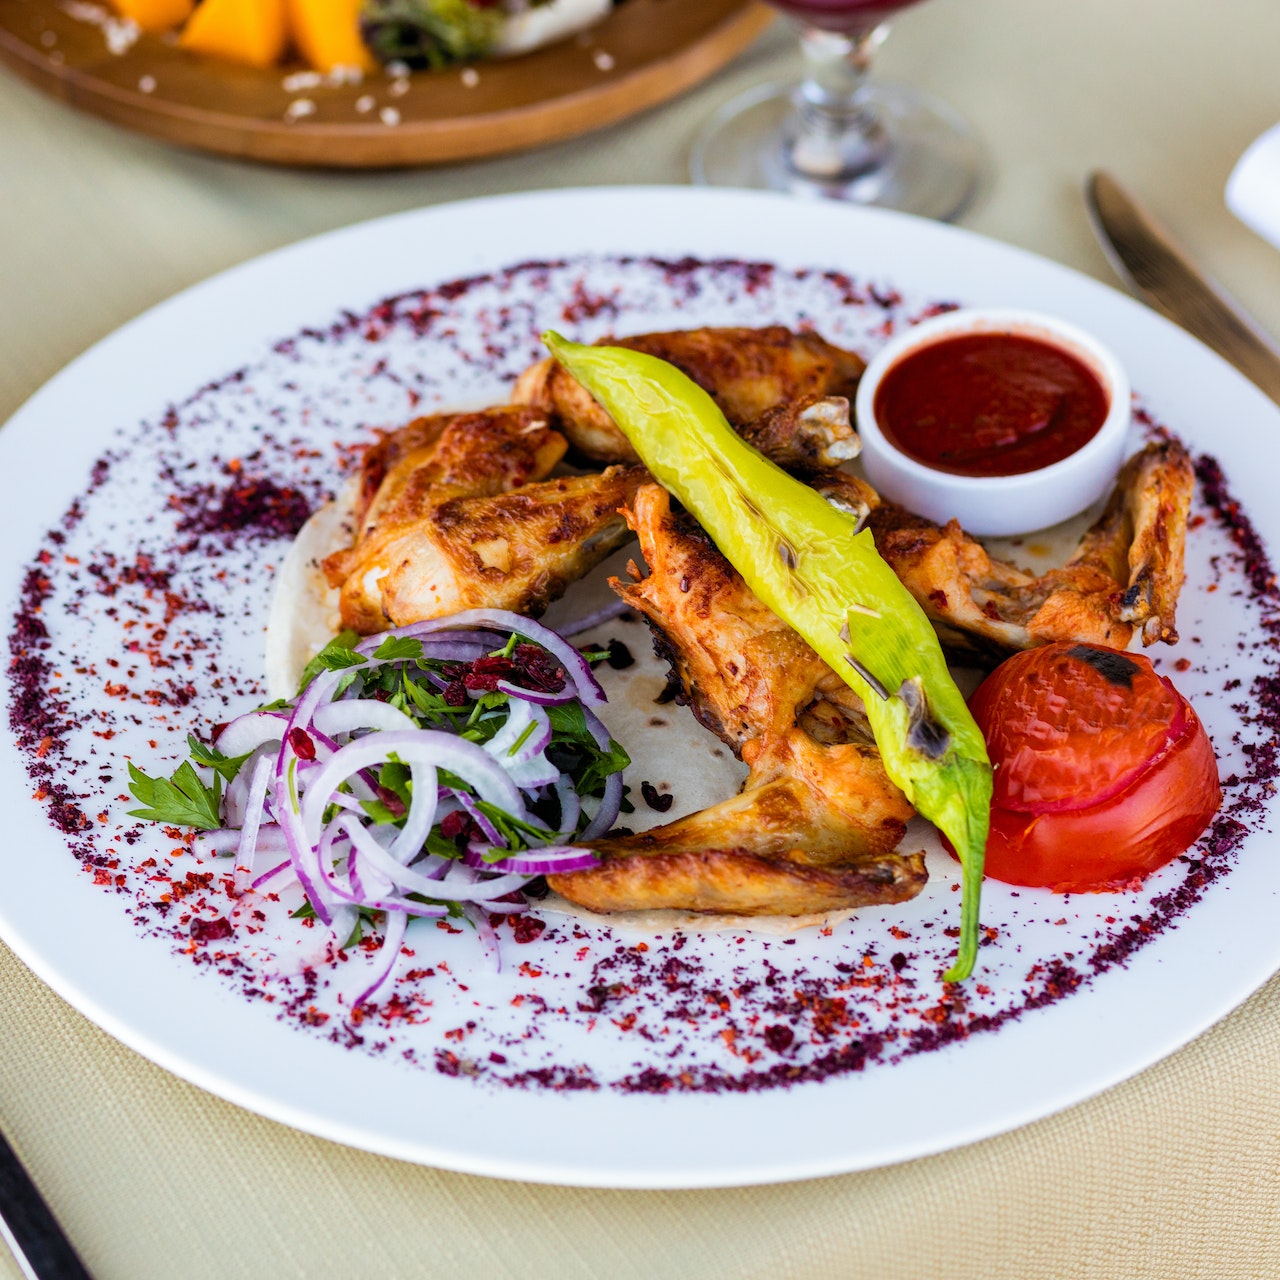 Chicken Barbecue Served With Pepper on White Ceramic Plate 